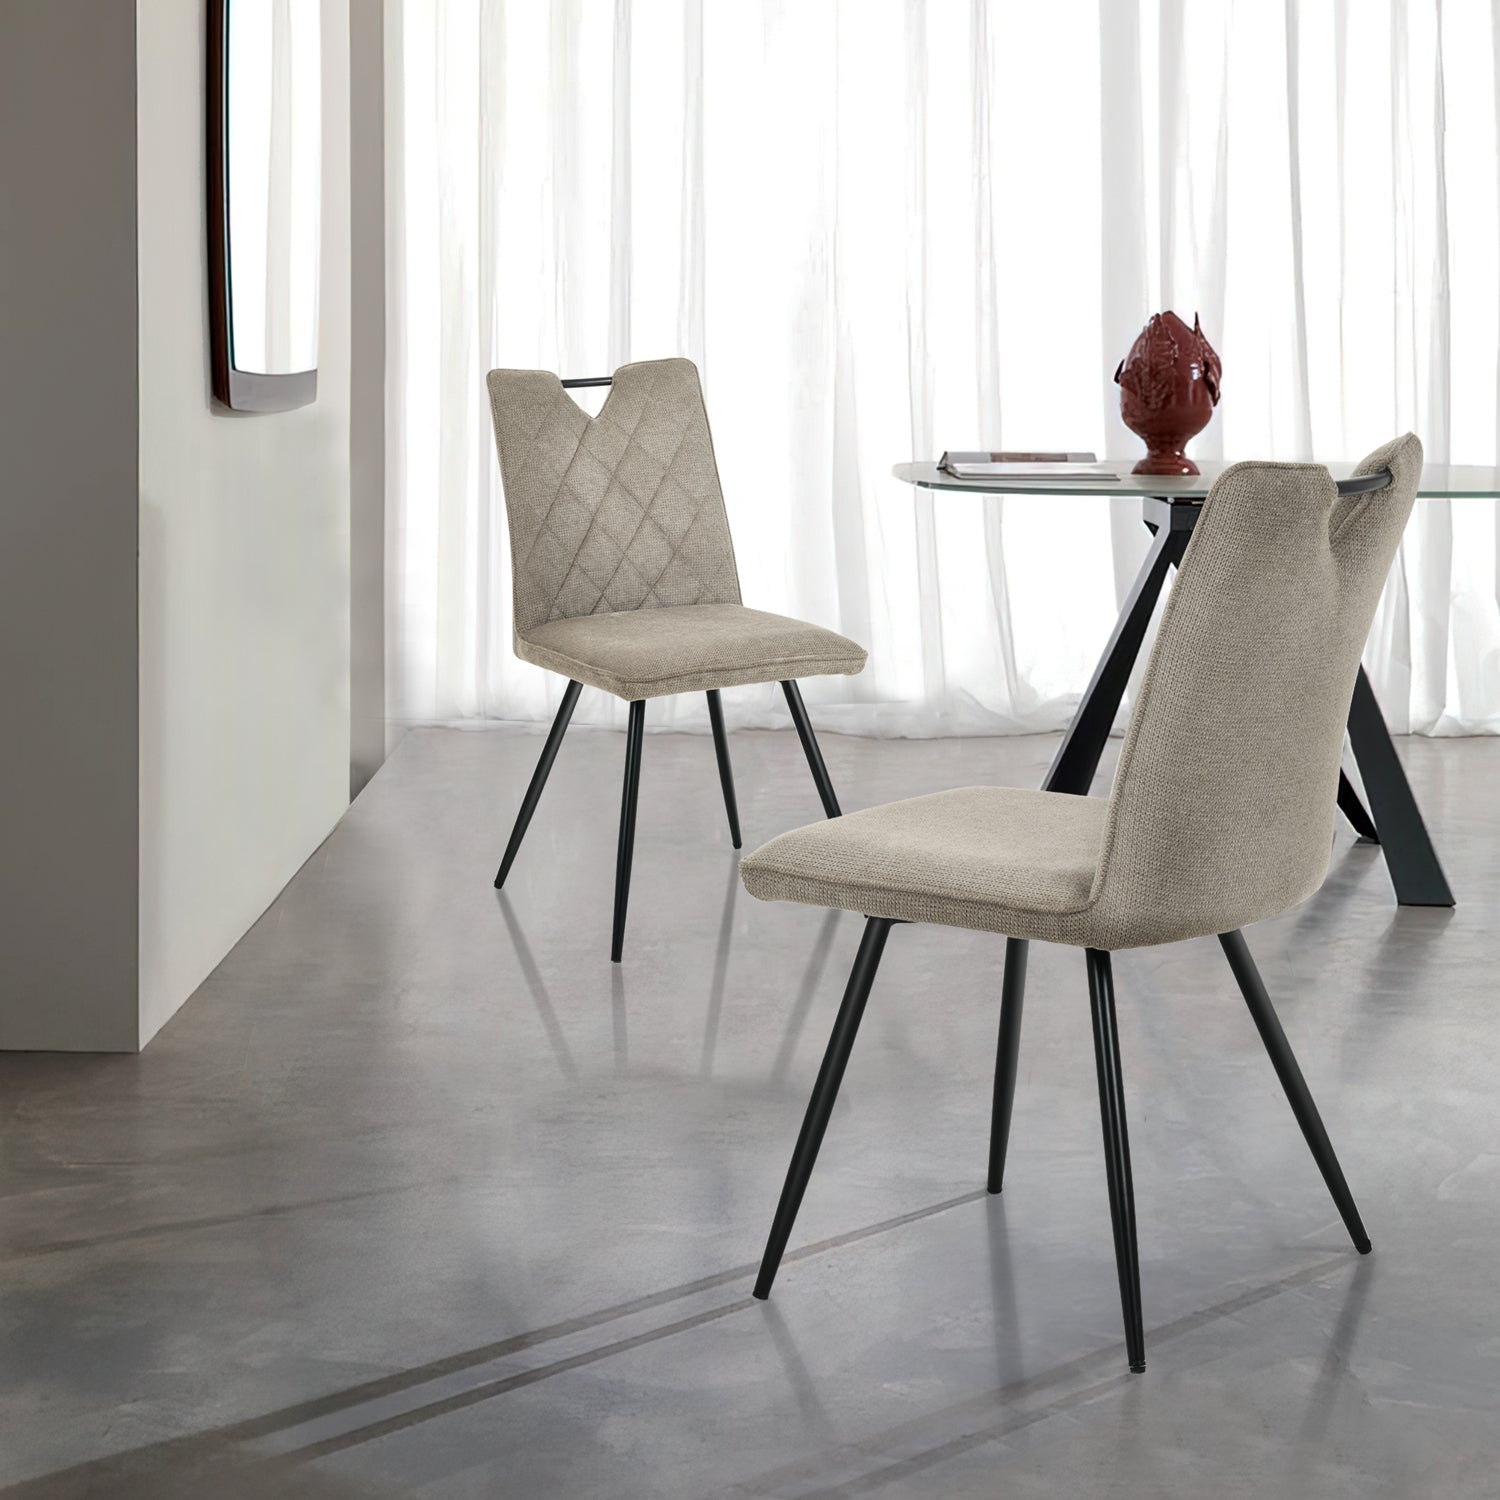 Tiana Dining Chairs [Set of 2] [Linen Fabric]